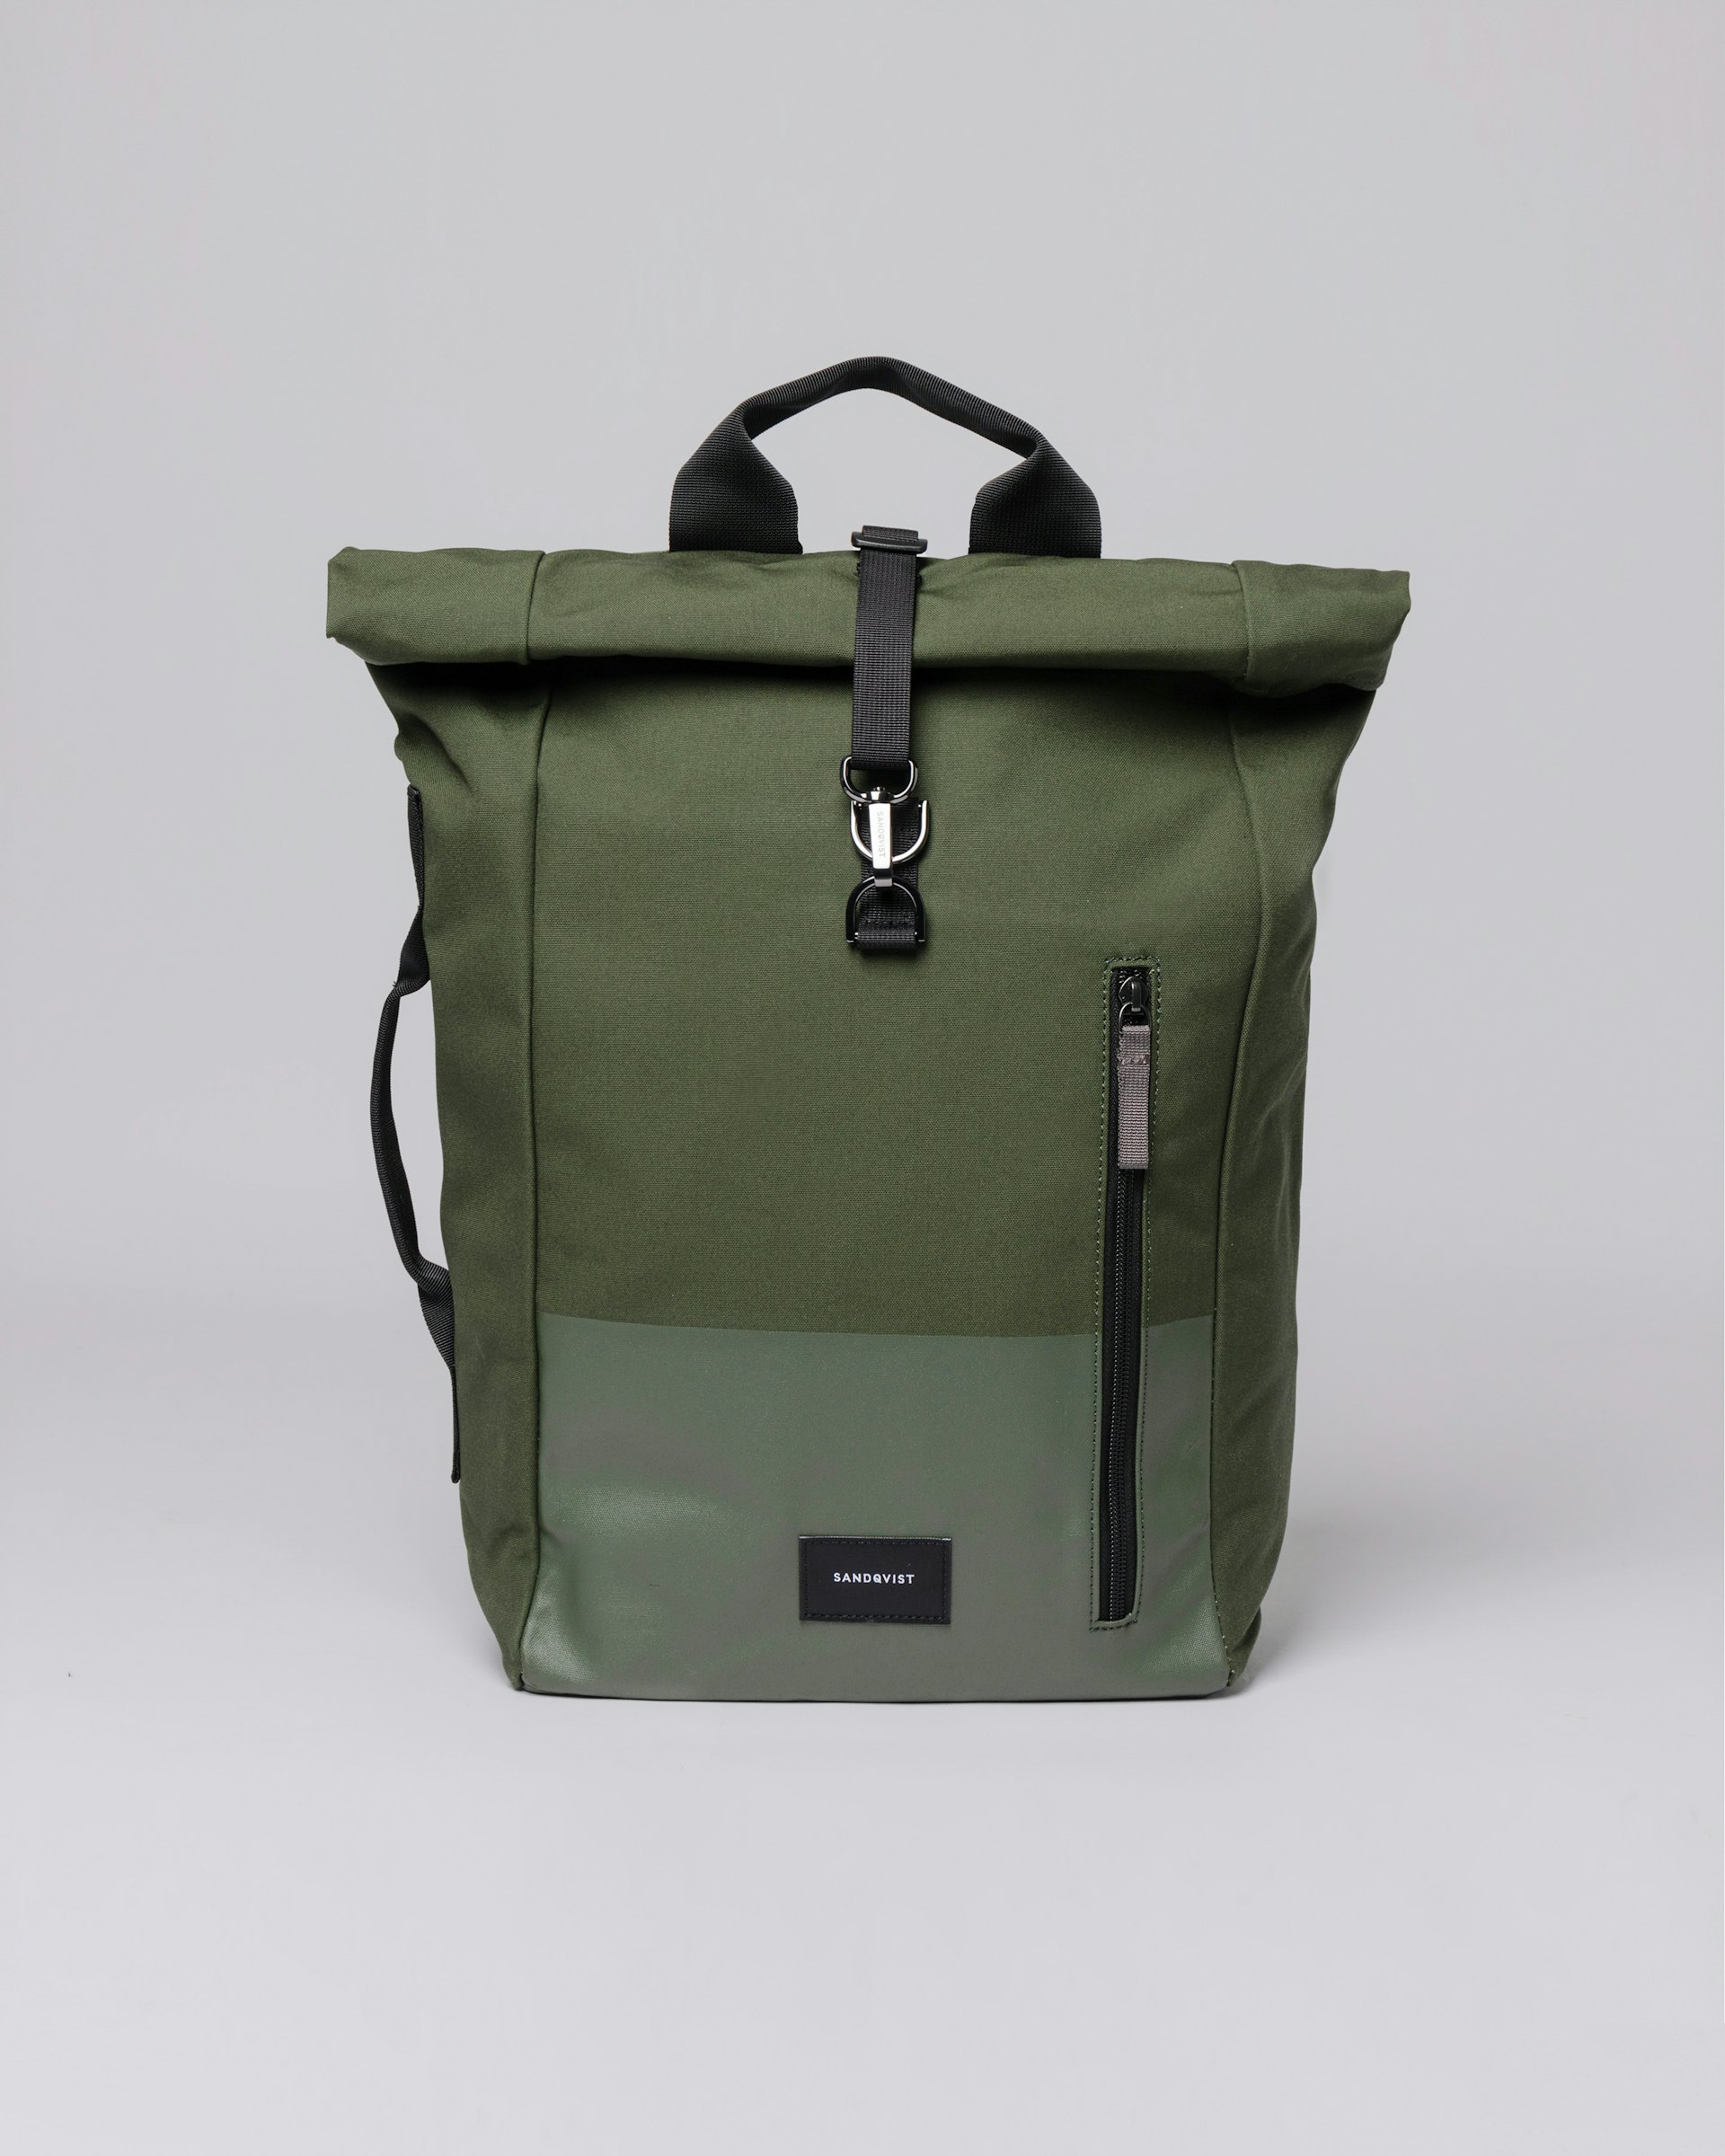 Dante vegan belongs to the category Backpacks and is in color dawn green